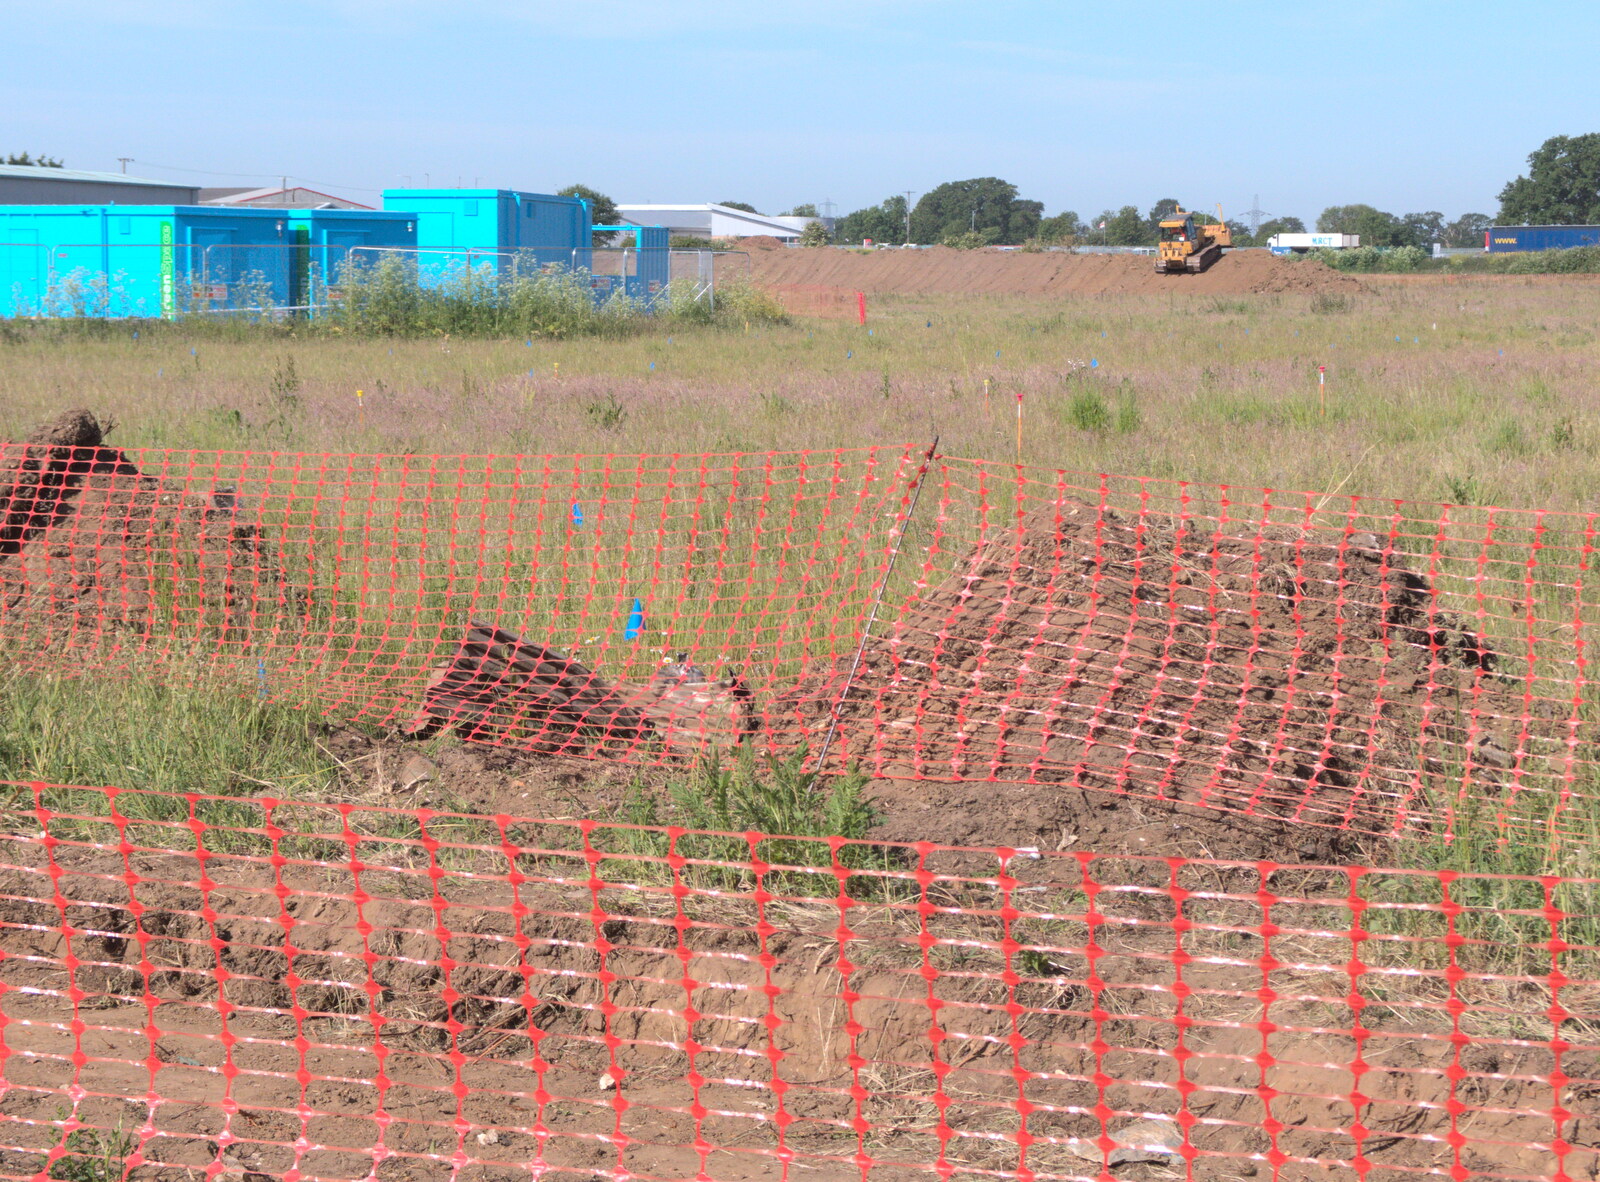 The building site for the new B1077 link road from The Old Brickworks and a New Road, Hoxne and Eye, Suffolk - 26th May 2020